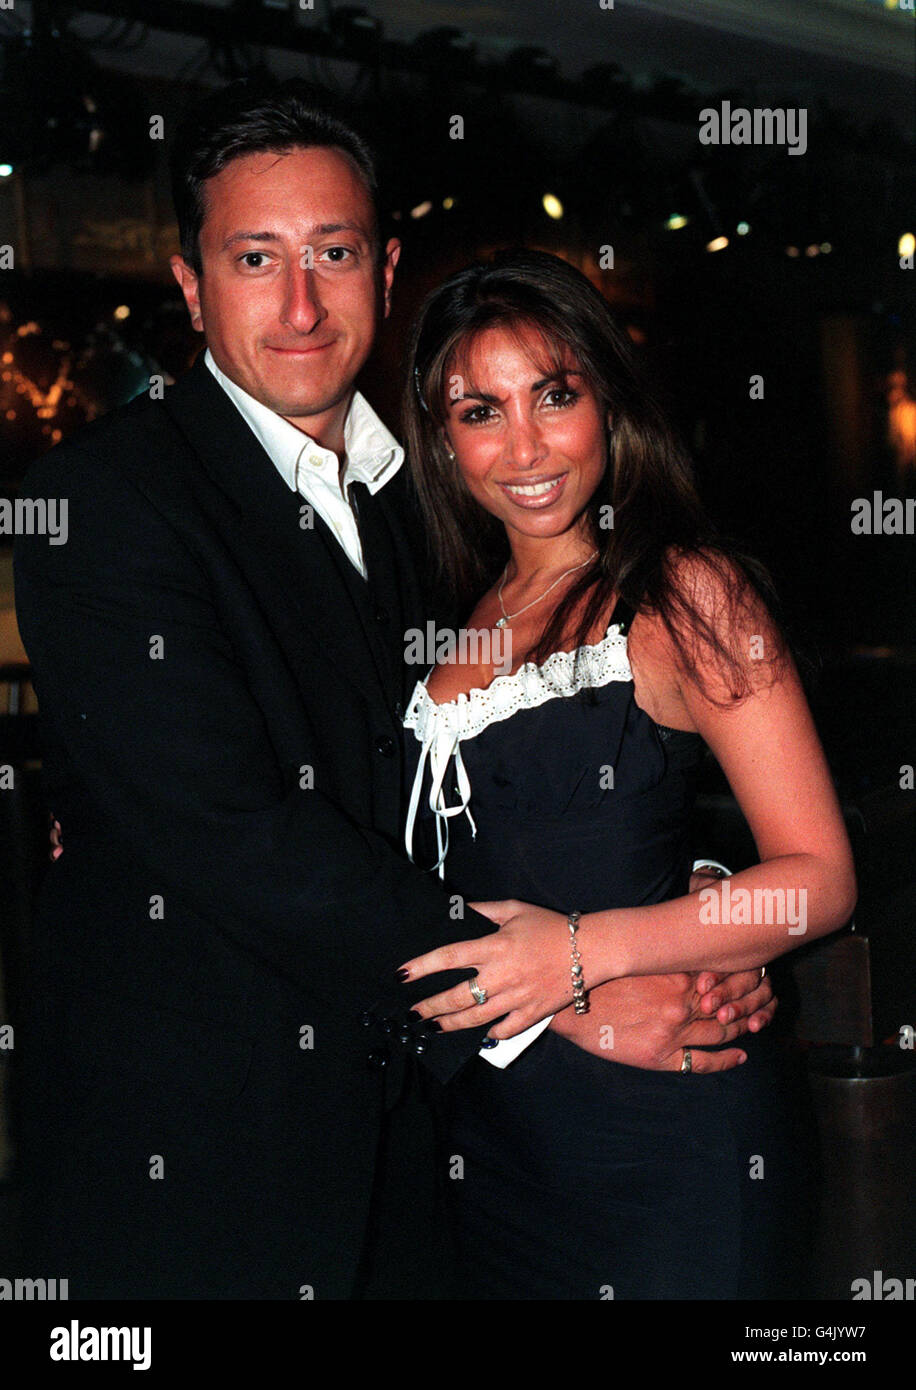 Francine Lewis, hostess on the BBC1 television programme 'Generation Game', attends a Variety Club night at the Sound Republic in London. Stock Photo